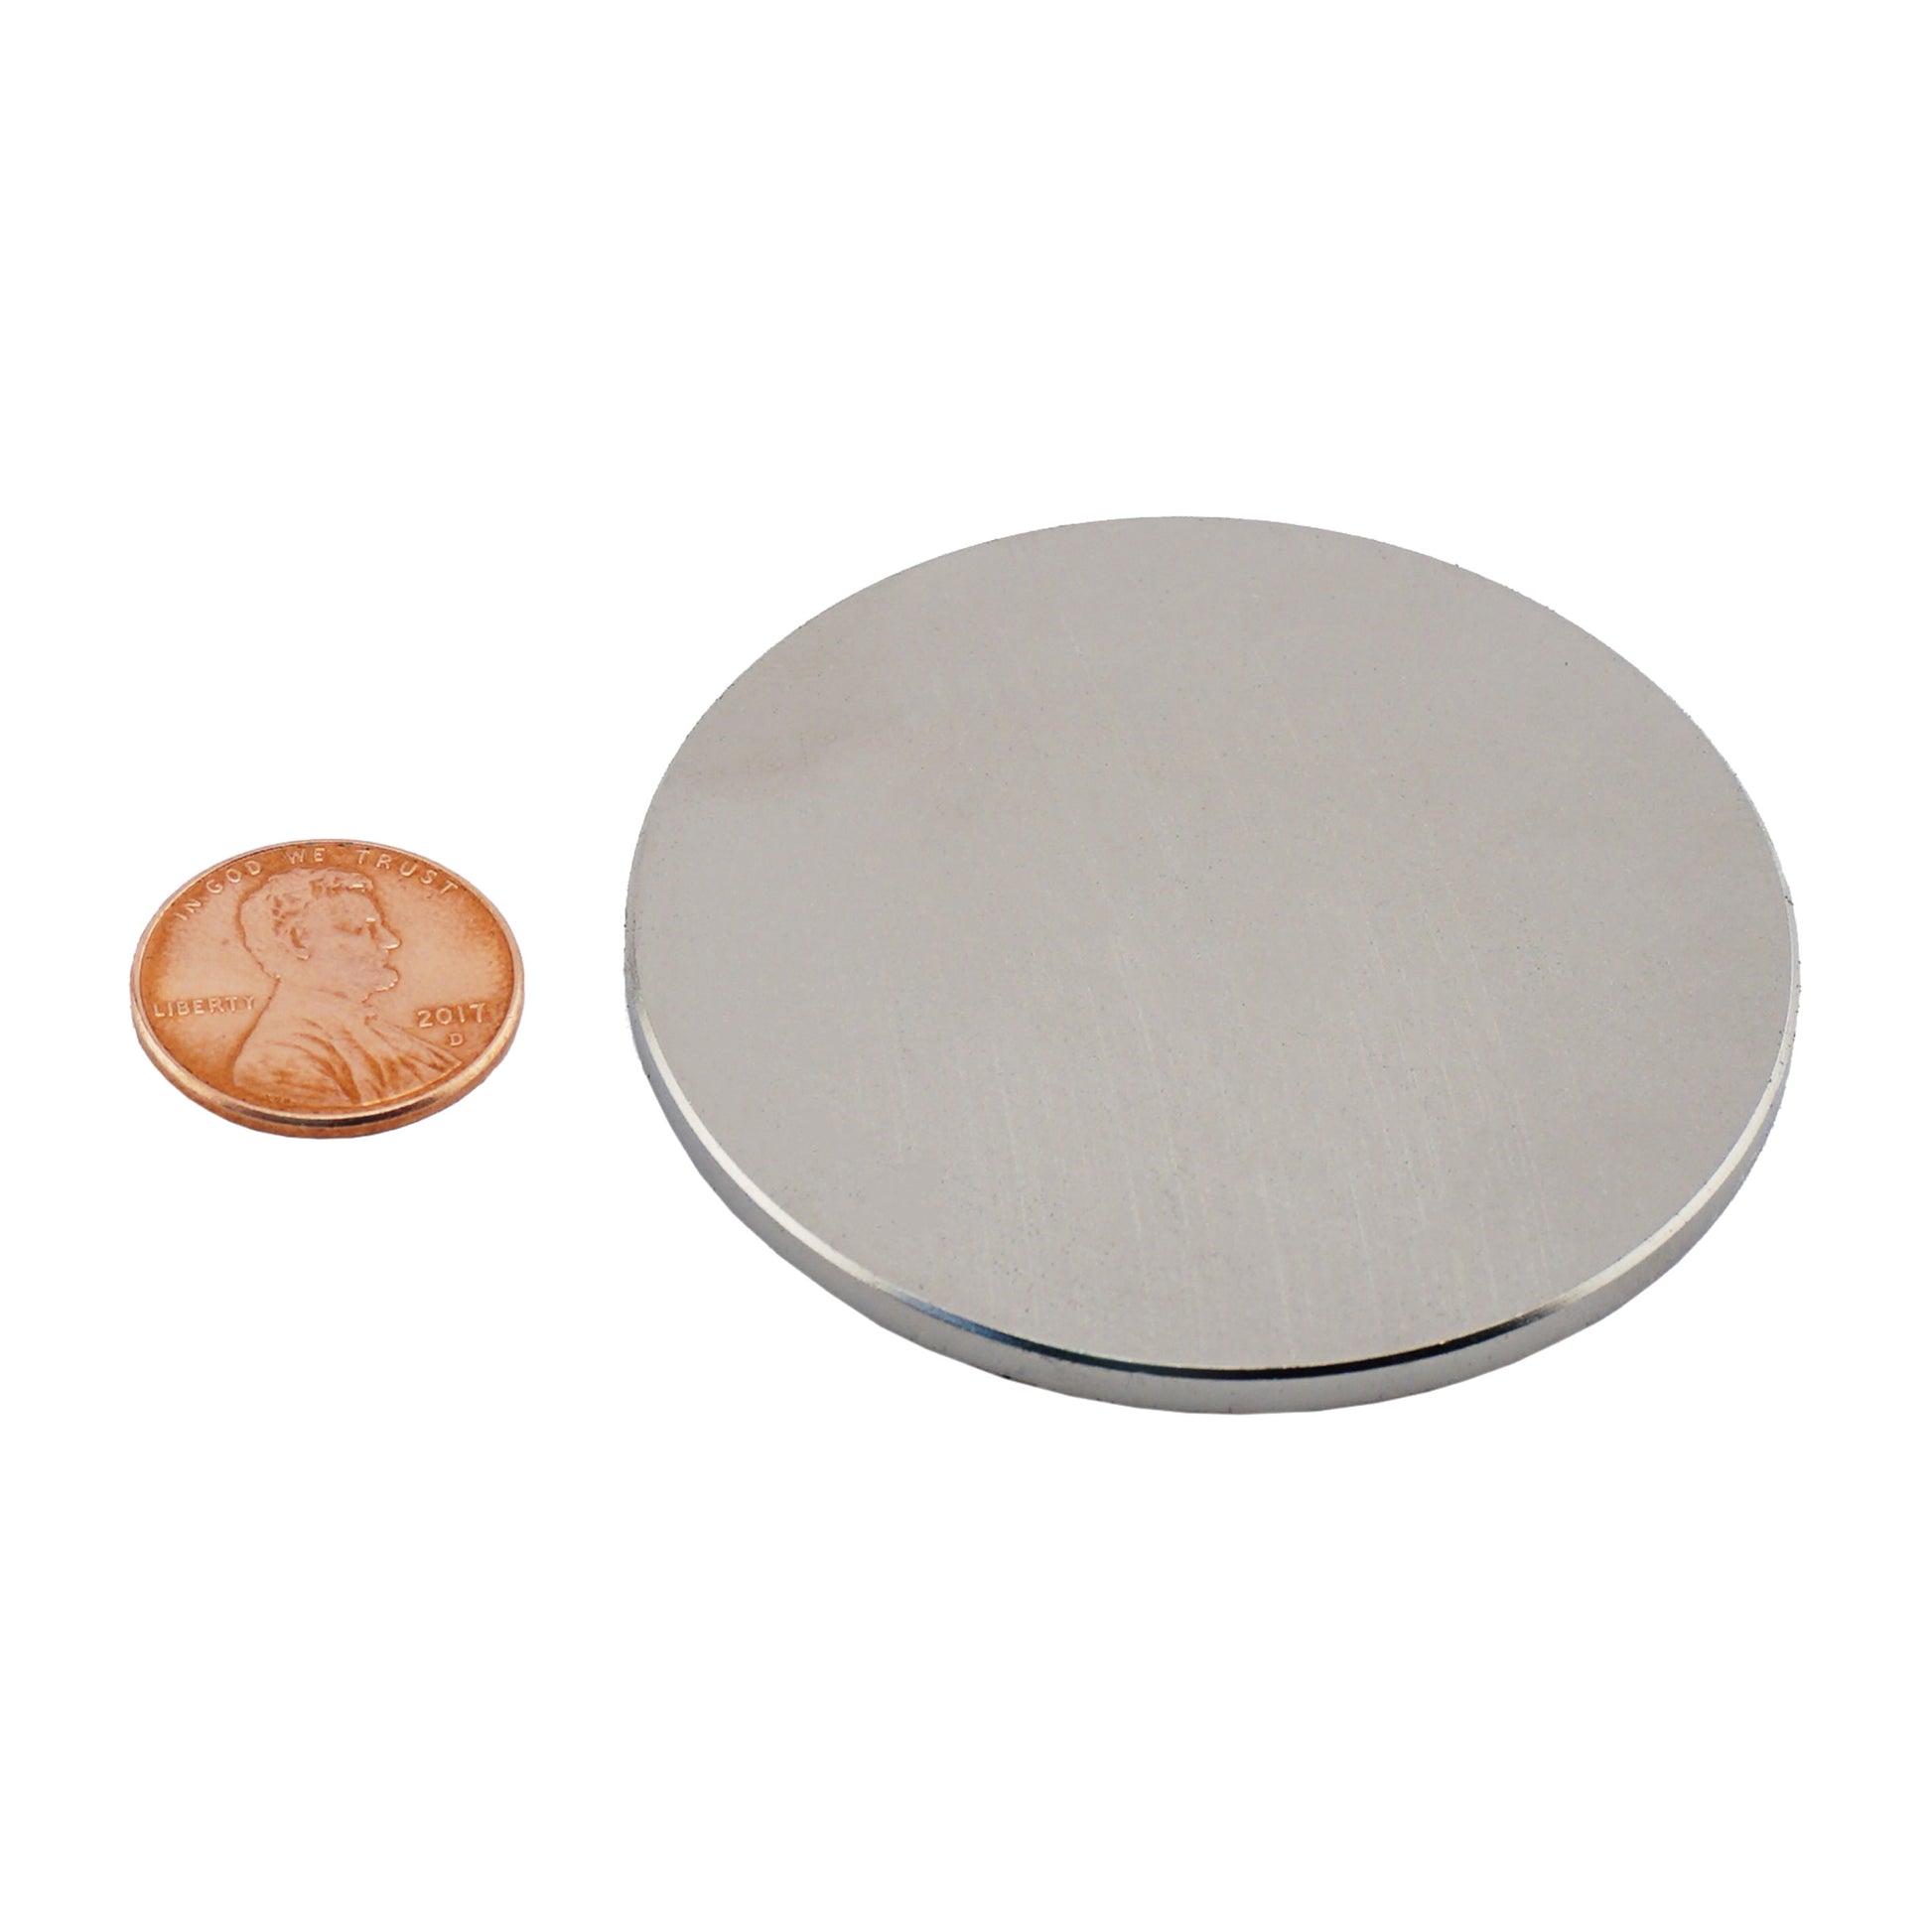 Load image into Gallery viewer, ND022500N Neodymium Disc Magnet - Compared to Penny for Size Reference